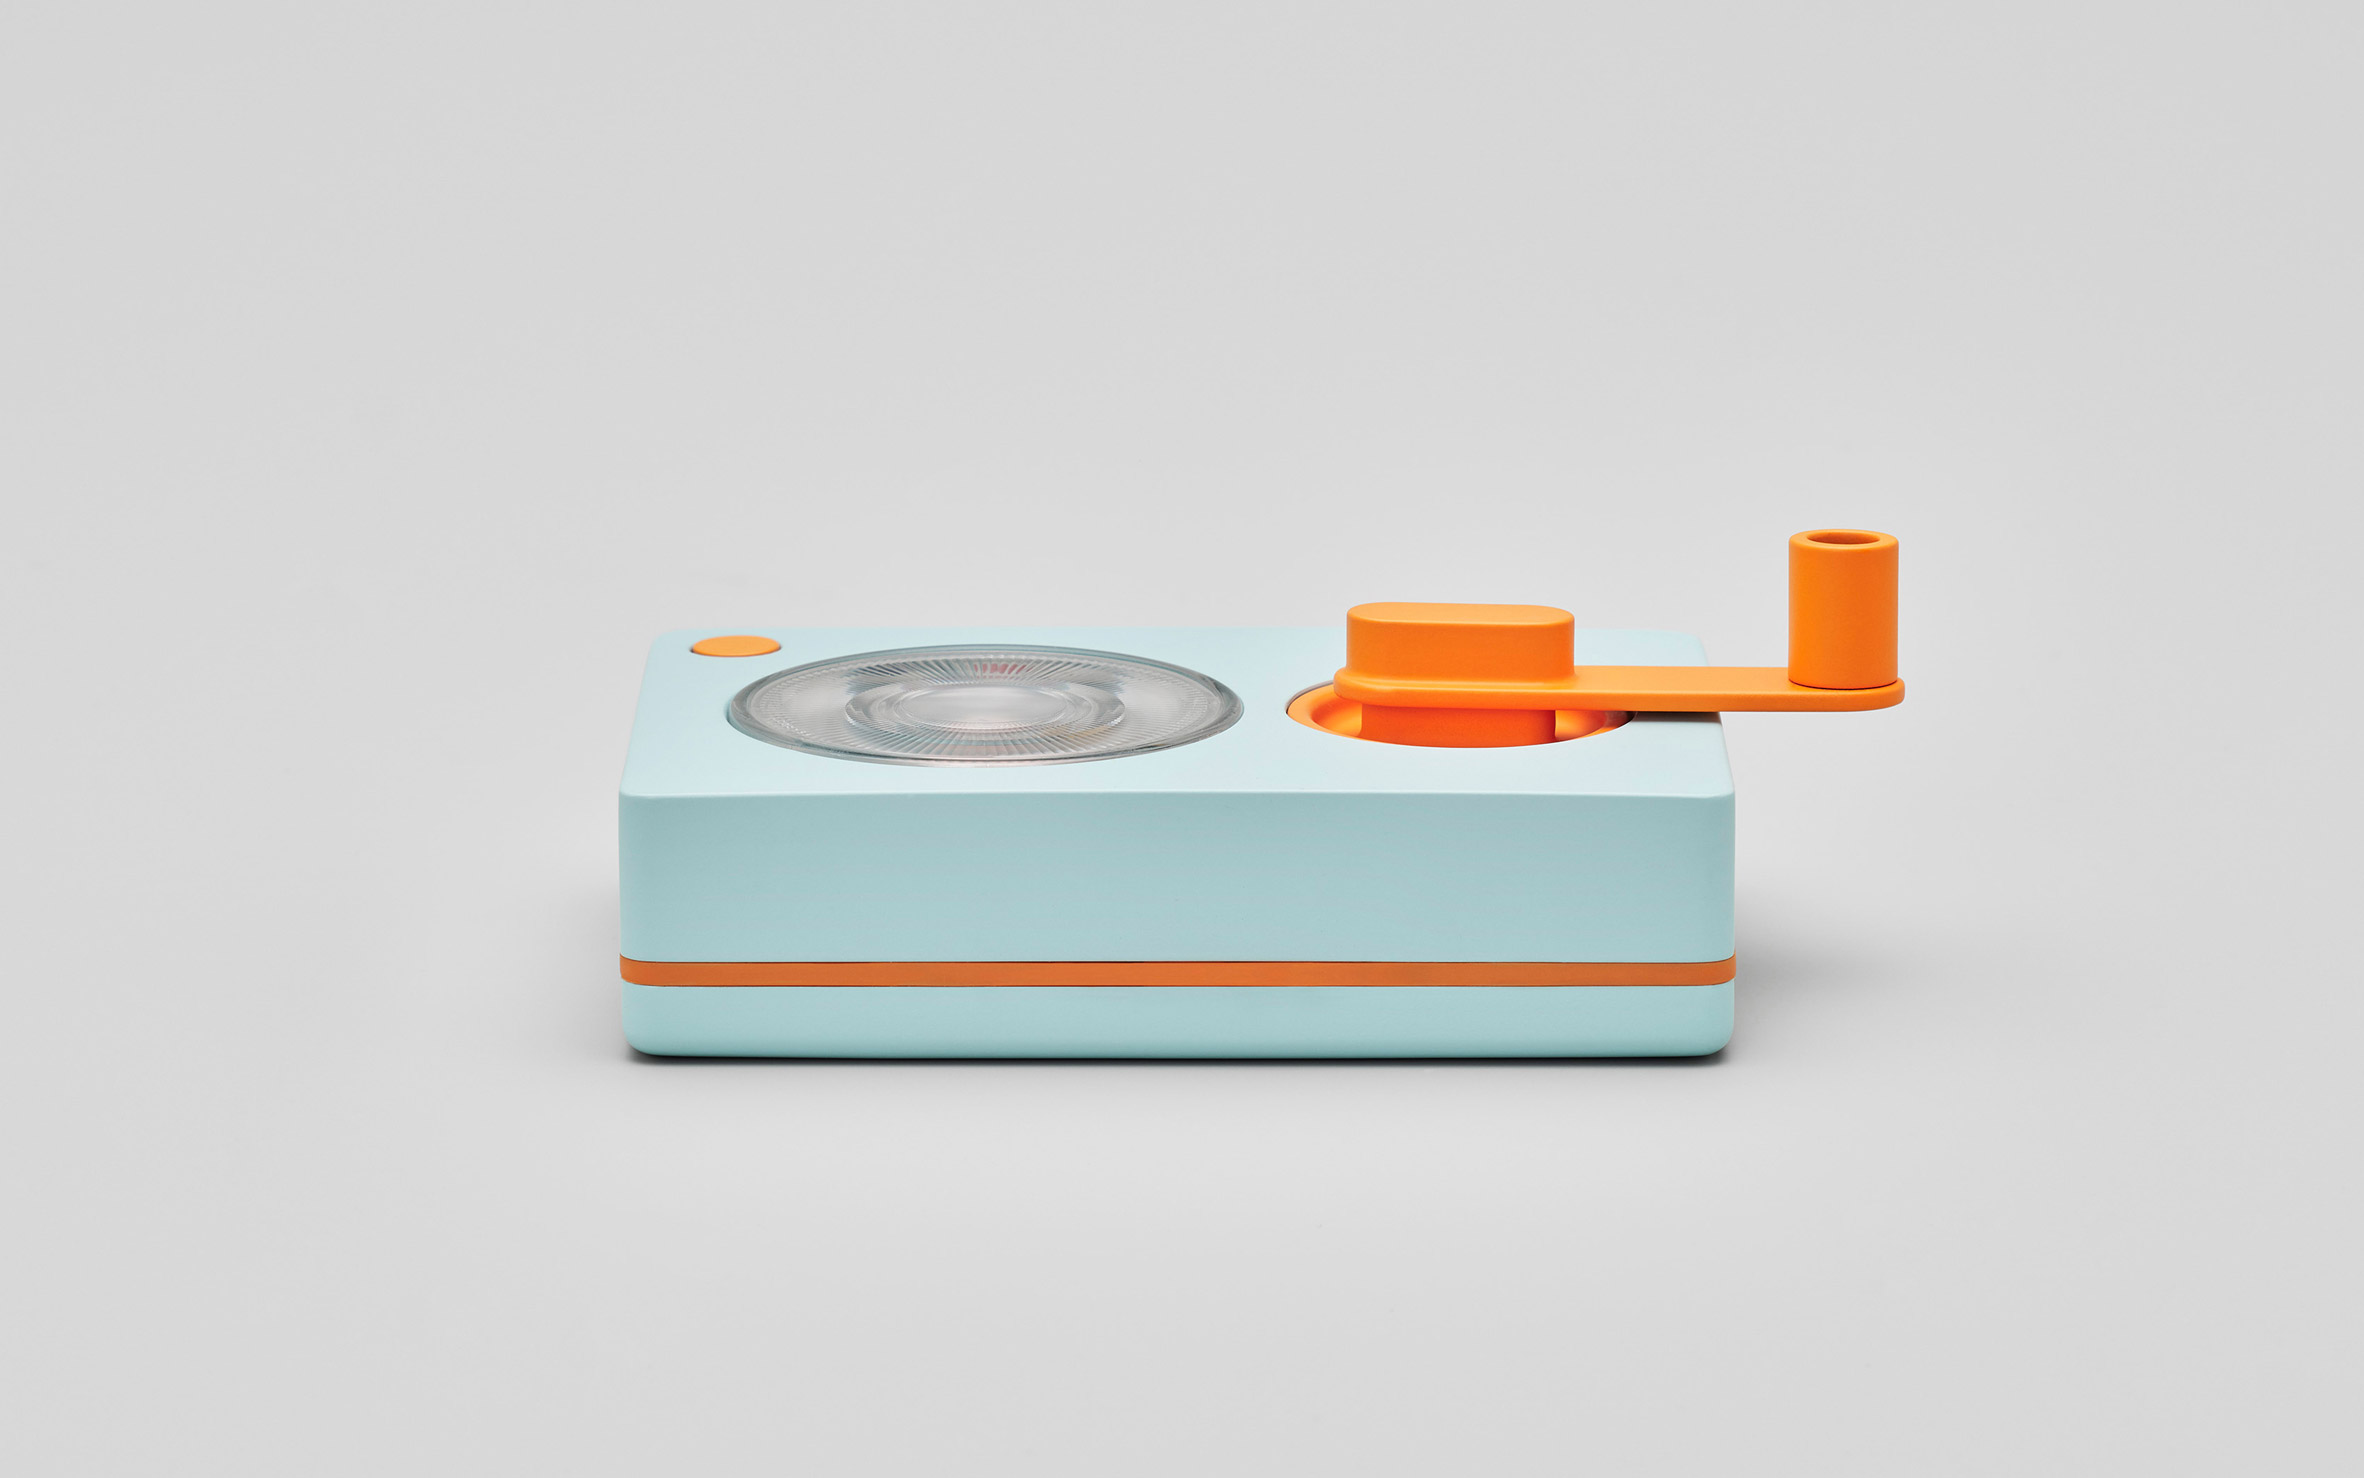 Photo of the Ambessa Play flashlight lying flat on its back, as seen from one side. An orange hand crank is attached to the front